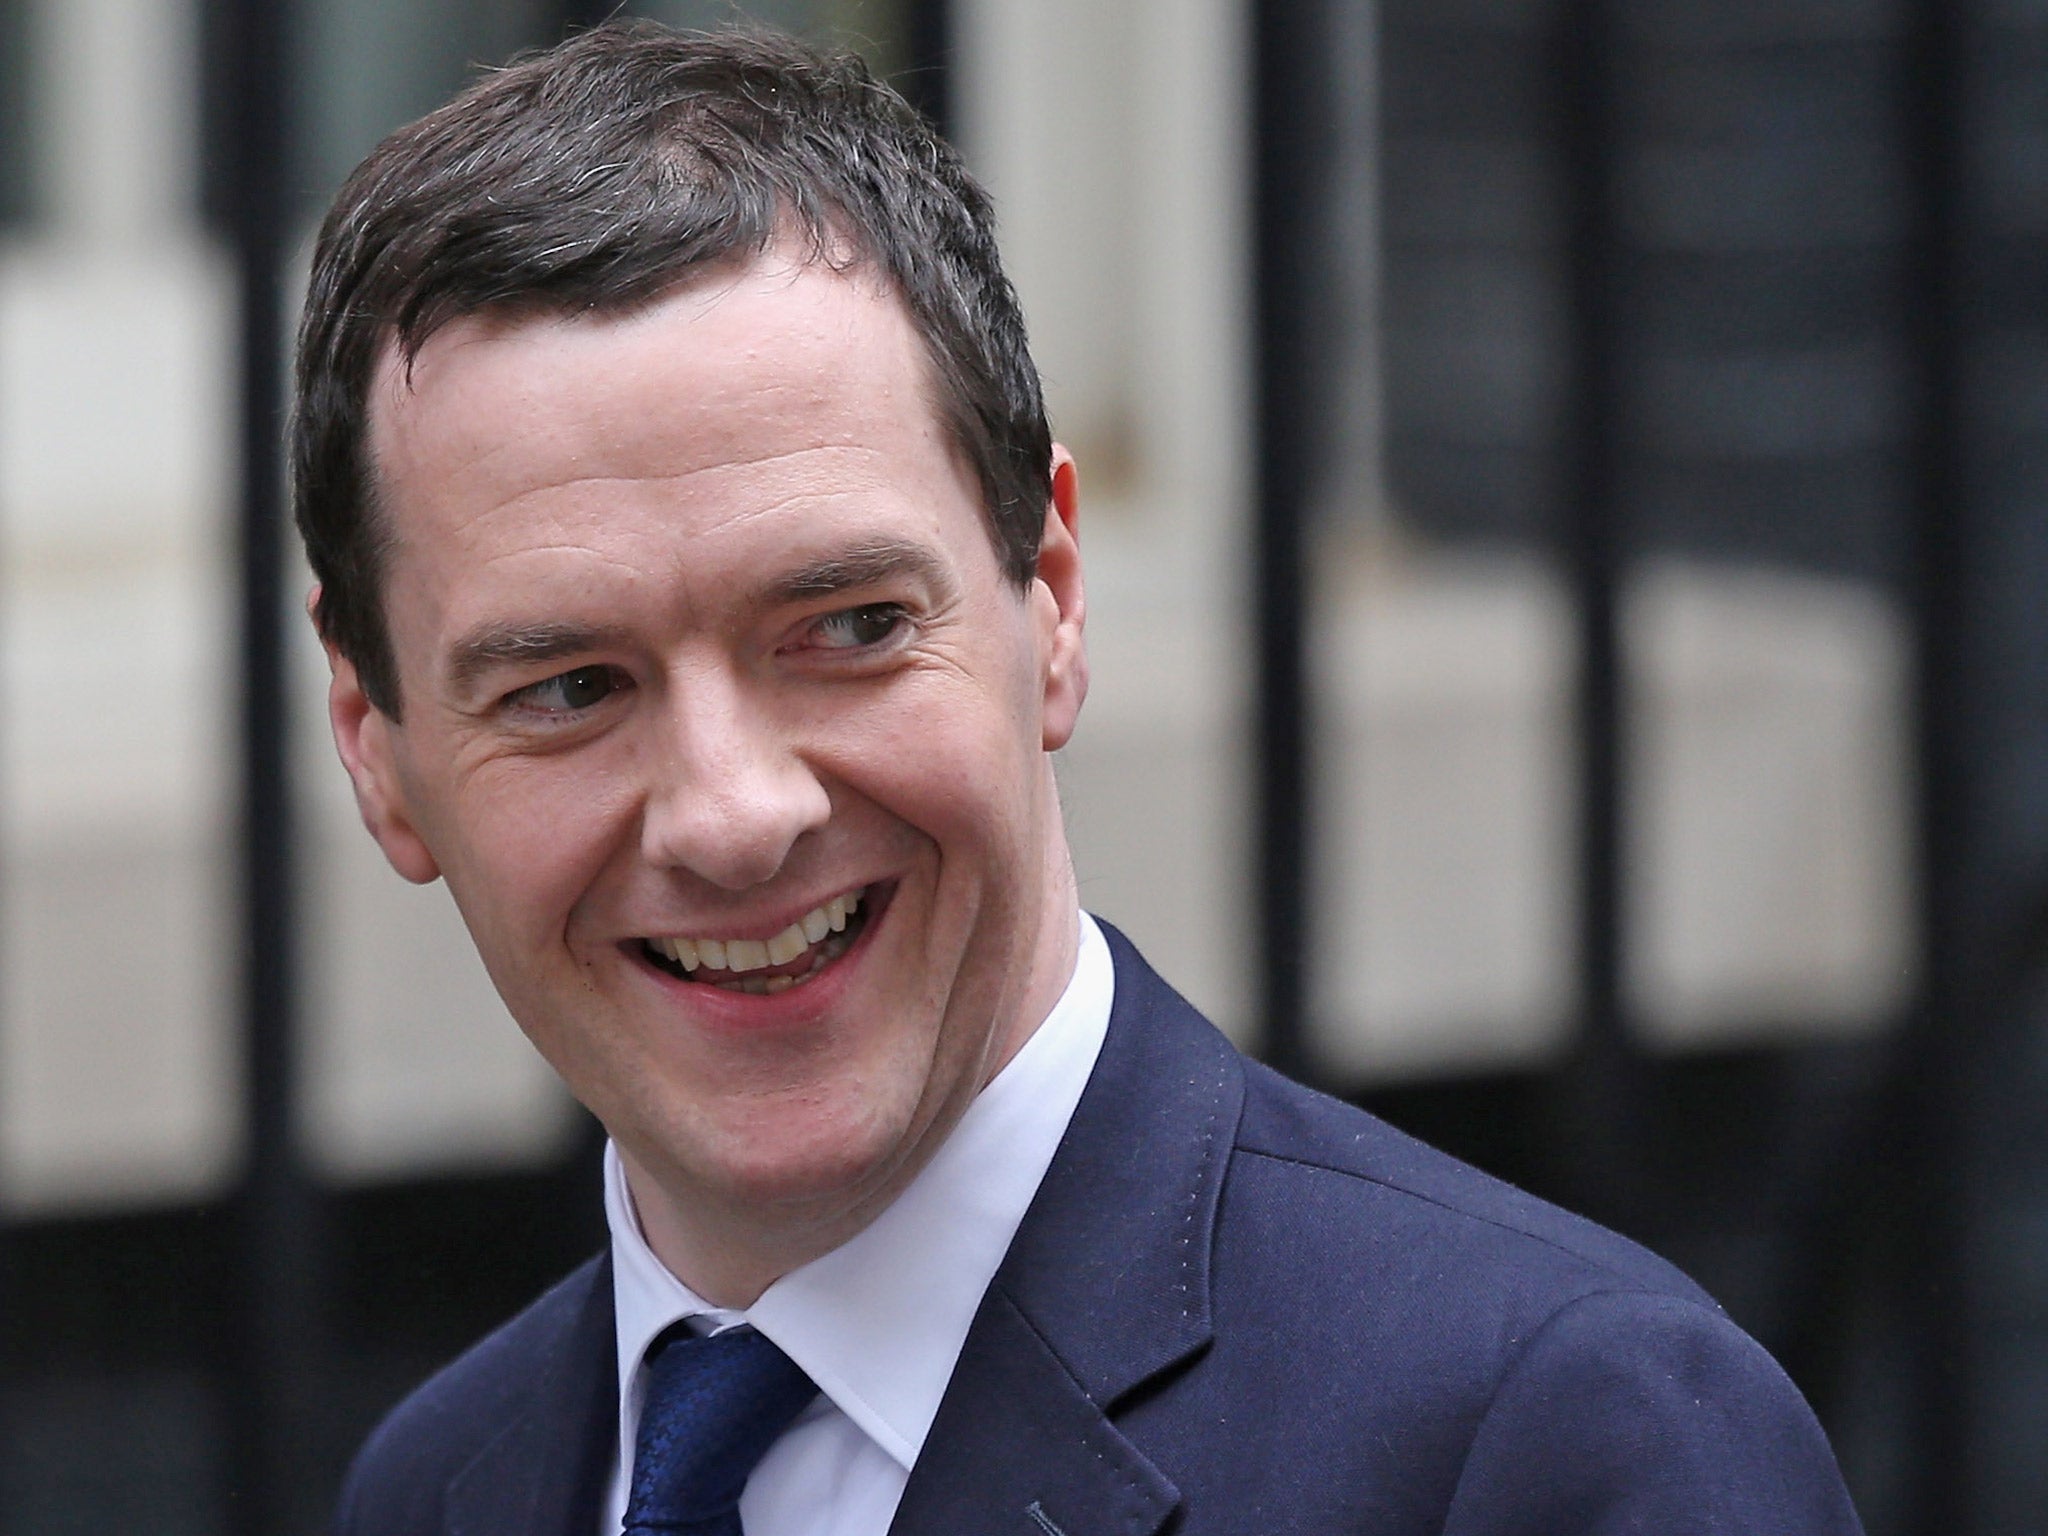 'We should not mistake this for damaging deflation,' the Chancellor has said